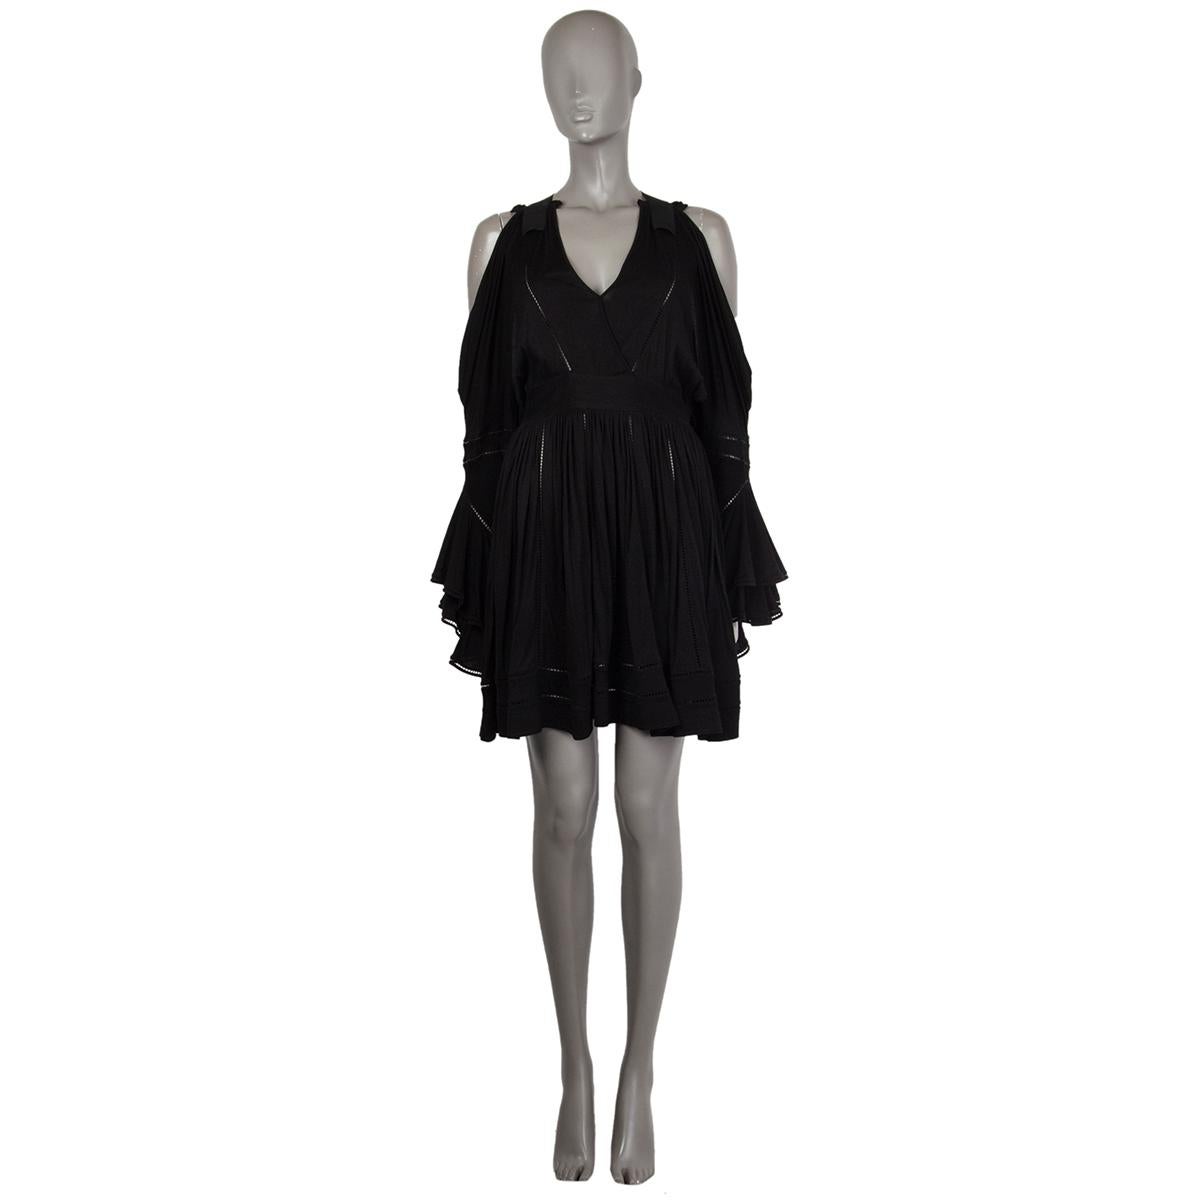 100% authentic Givenchy jersey mini dress in black viscose (81%) and silk (19%). With cutout shoulders, v neck, racer back, empire waist, and ruffled sleeves. Closes with hook and invisible zipper on the side. Unlined. Has been worn and is in